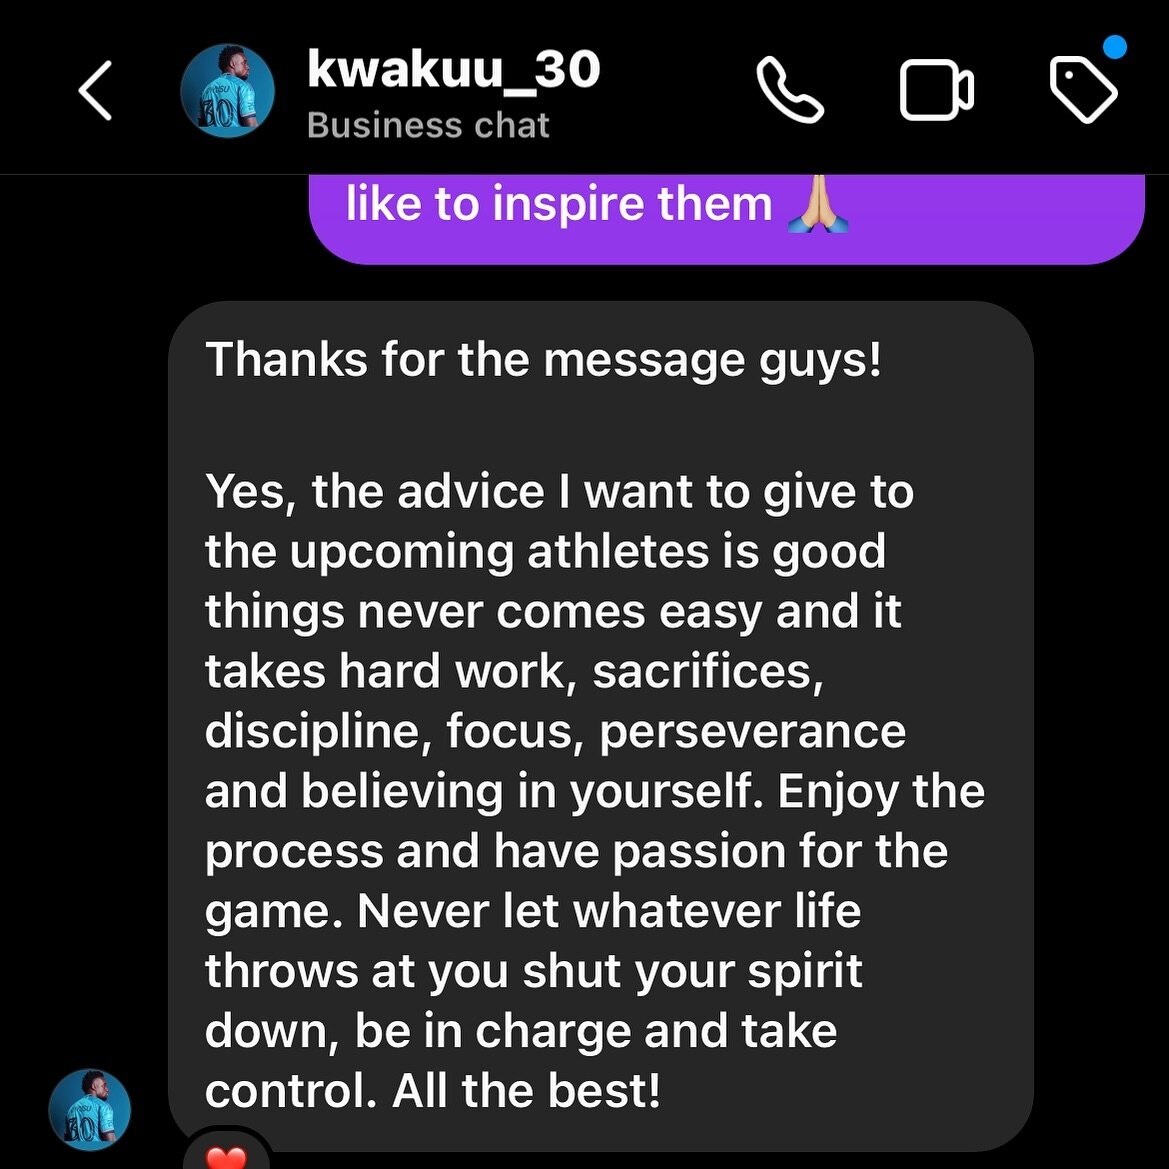 Thank you for the wise words bro @kwakuu_30 

There&rsquo;s a lot of dedication and sacrifices that are needed to make it the professional level. The best things never come easy and although there will be distractions, always remind yourself of what 